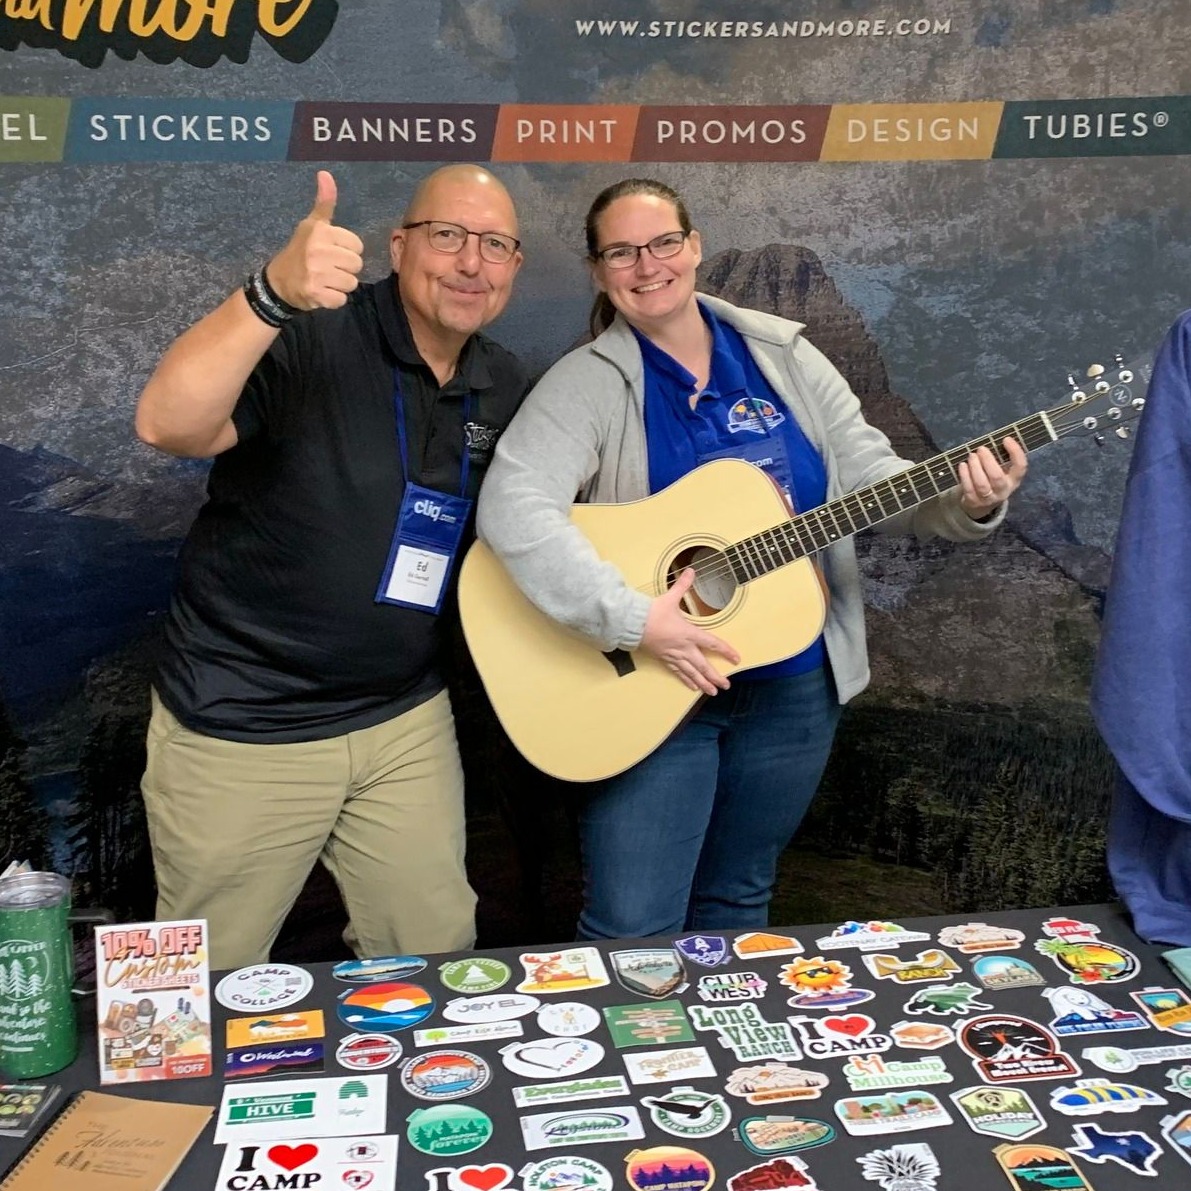 Congrats to Nicole from Vincennes University STEM Academy in Westphalia, IN. on winning the guitar at the American Camp Association Winter Gathering. Let us help you Elevate your brand. Check out our website to see how we can help you today.
https://stickersandmore.com/camp/
@vincennesu @acacamps #ACA #acacamps #guitar #winners #camplife